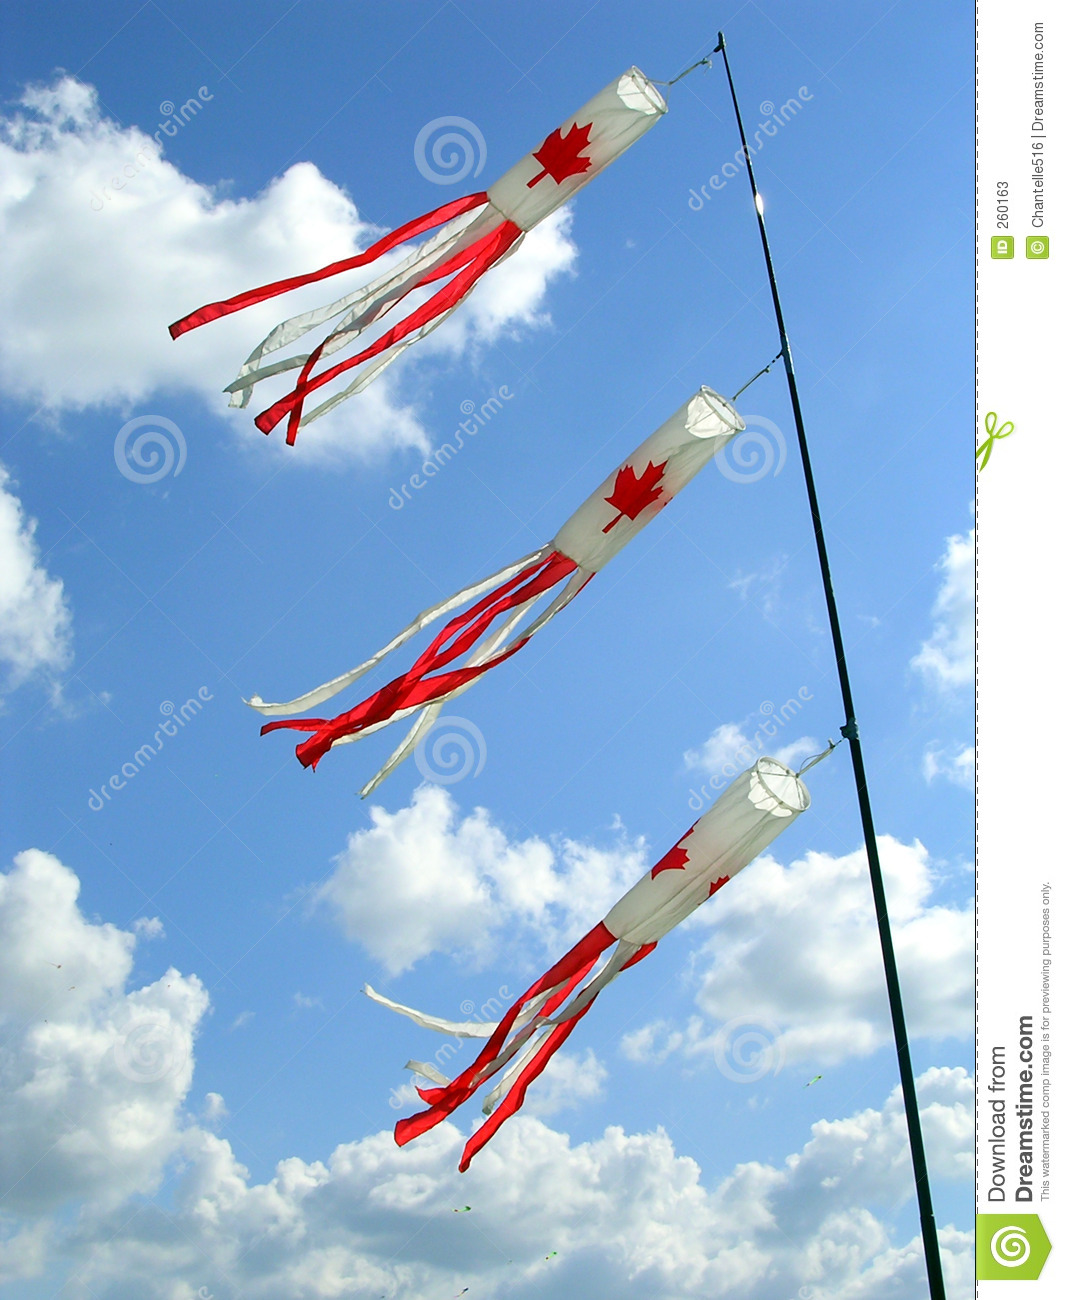 Kites With Canadian Flag Pattern Stock Photos   Image  260163